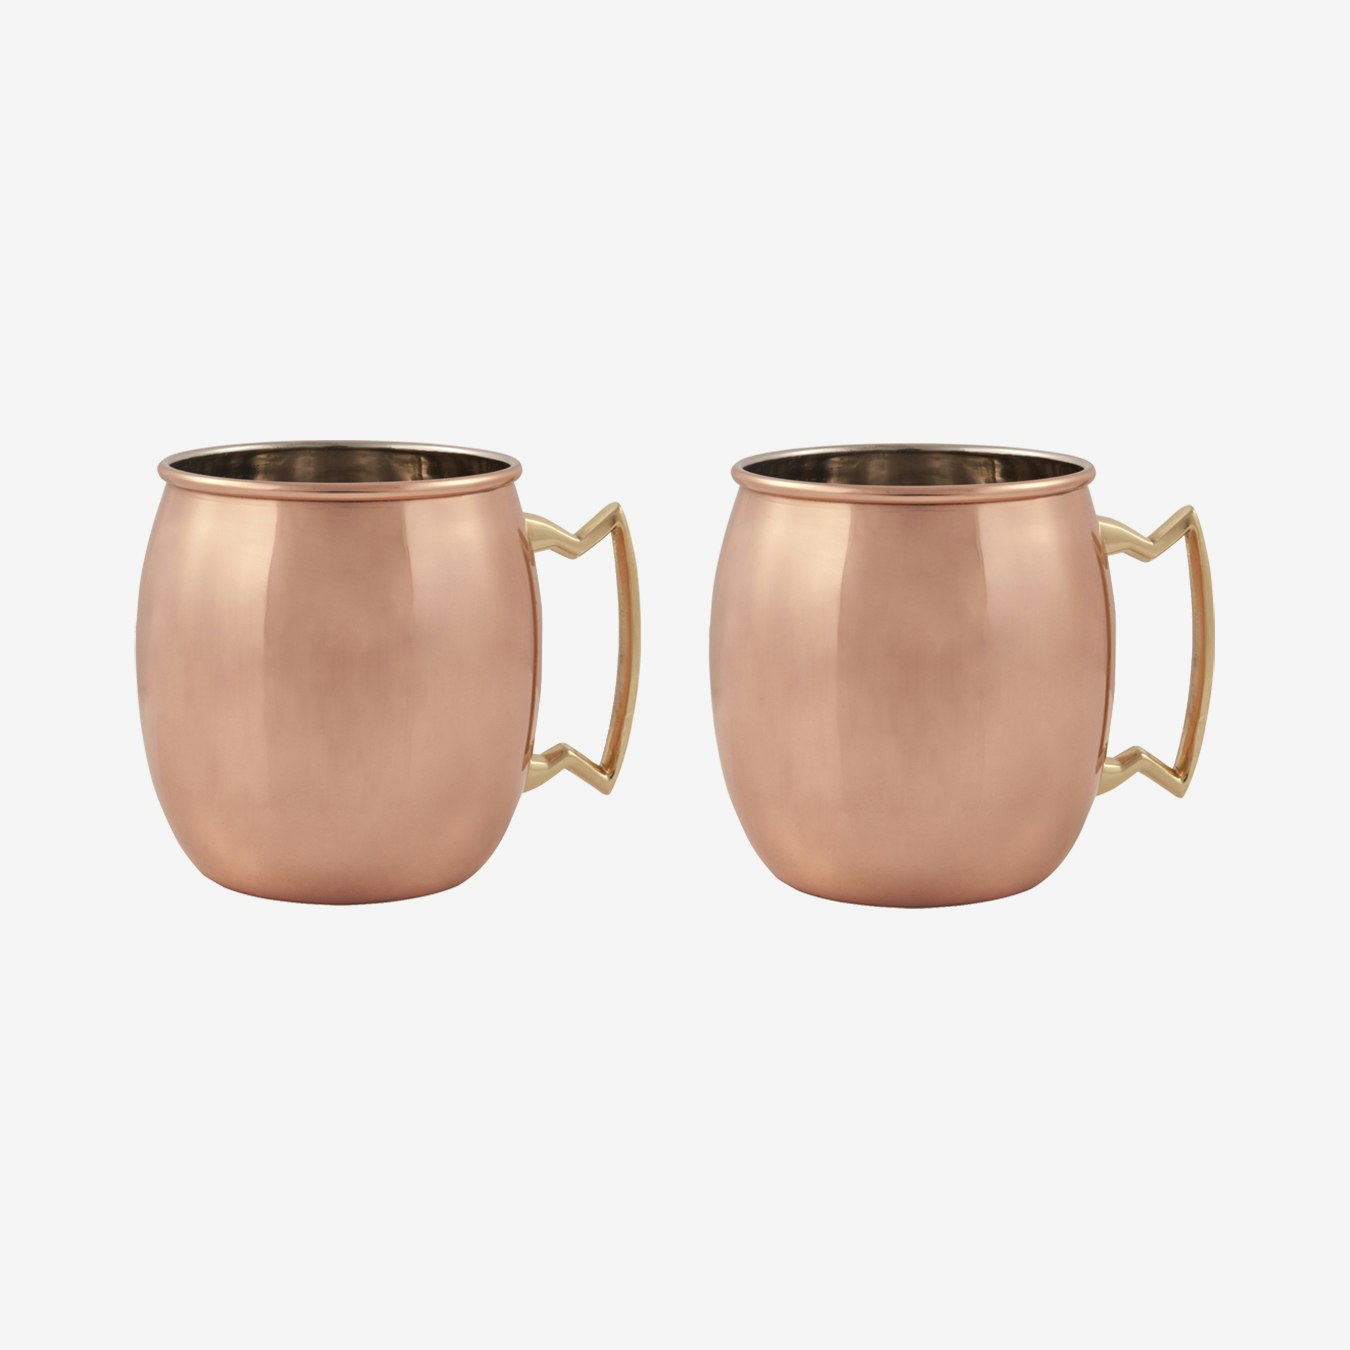 Moscow Mule Cocktail Mugs - Copper - of 2 by True -